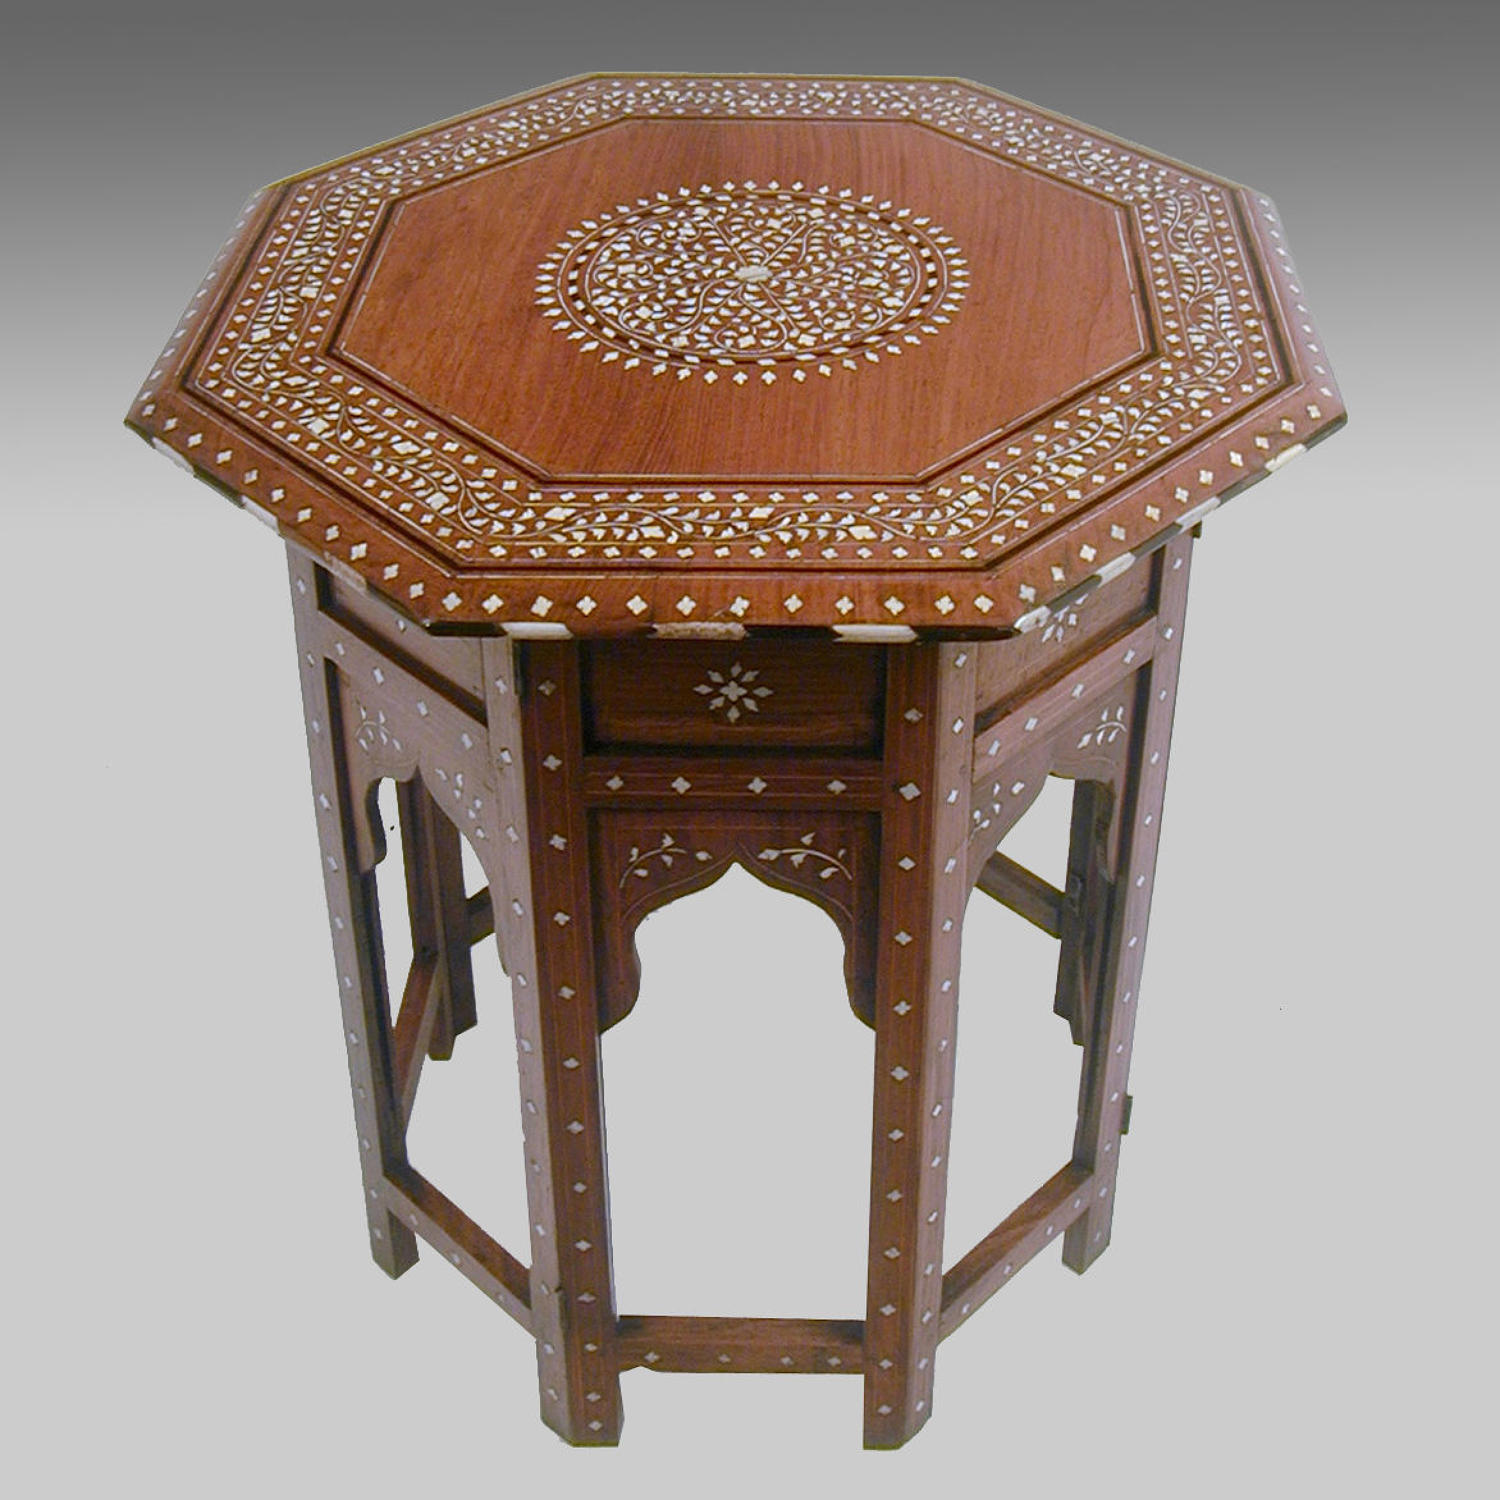 Late 19th century Anglo Indian inlaid shisham table